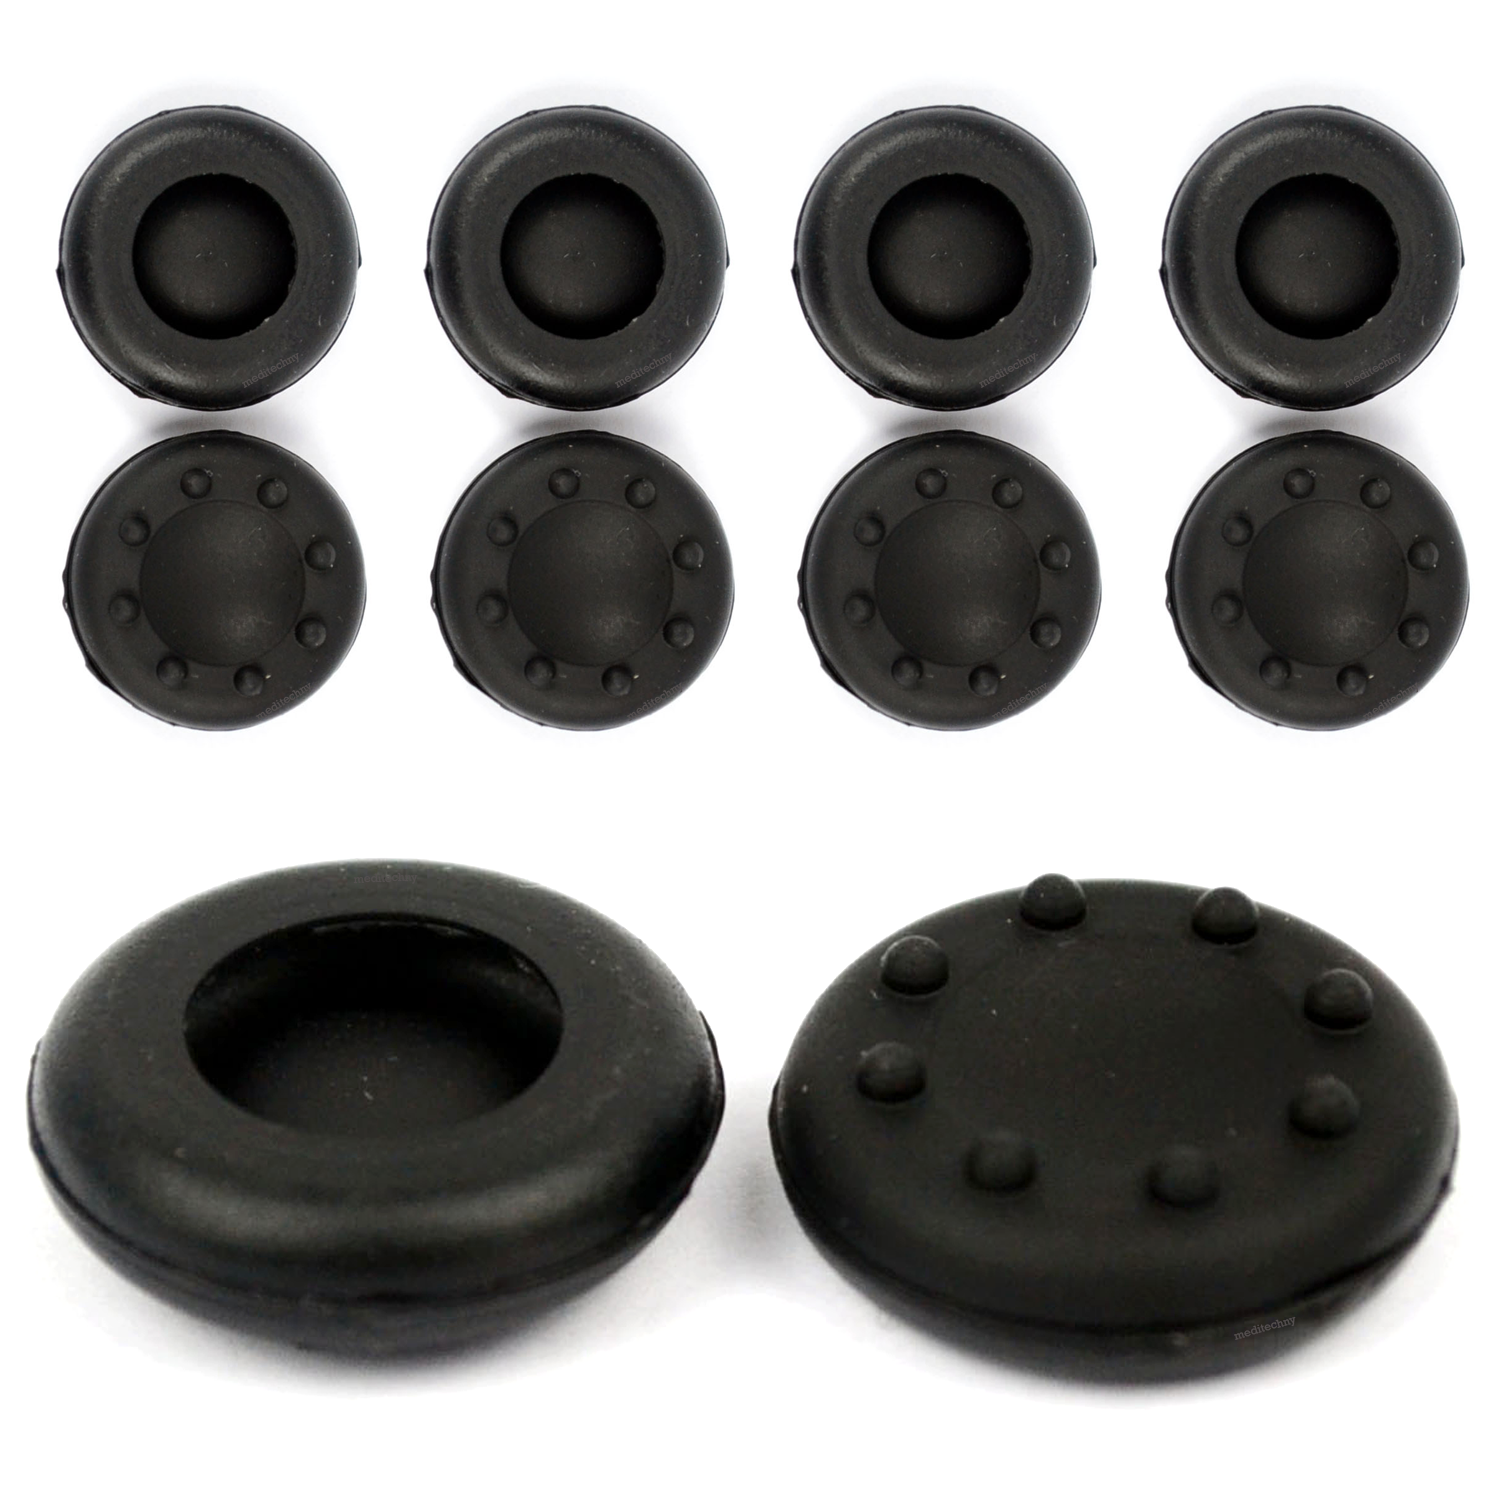 10x Black Thumbstick Grips Cap Cover Thumb Stick Grip for Xbox 360 PS3 PS4 Wii Unbranded/Generic PS4 PS3 - фотография #3